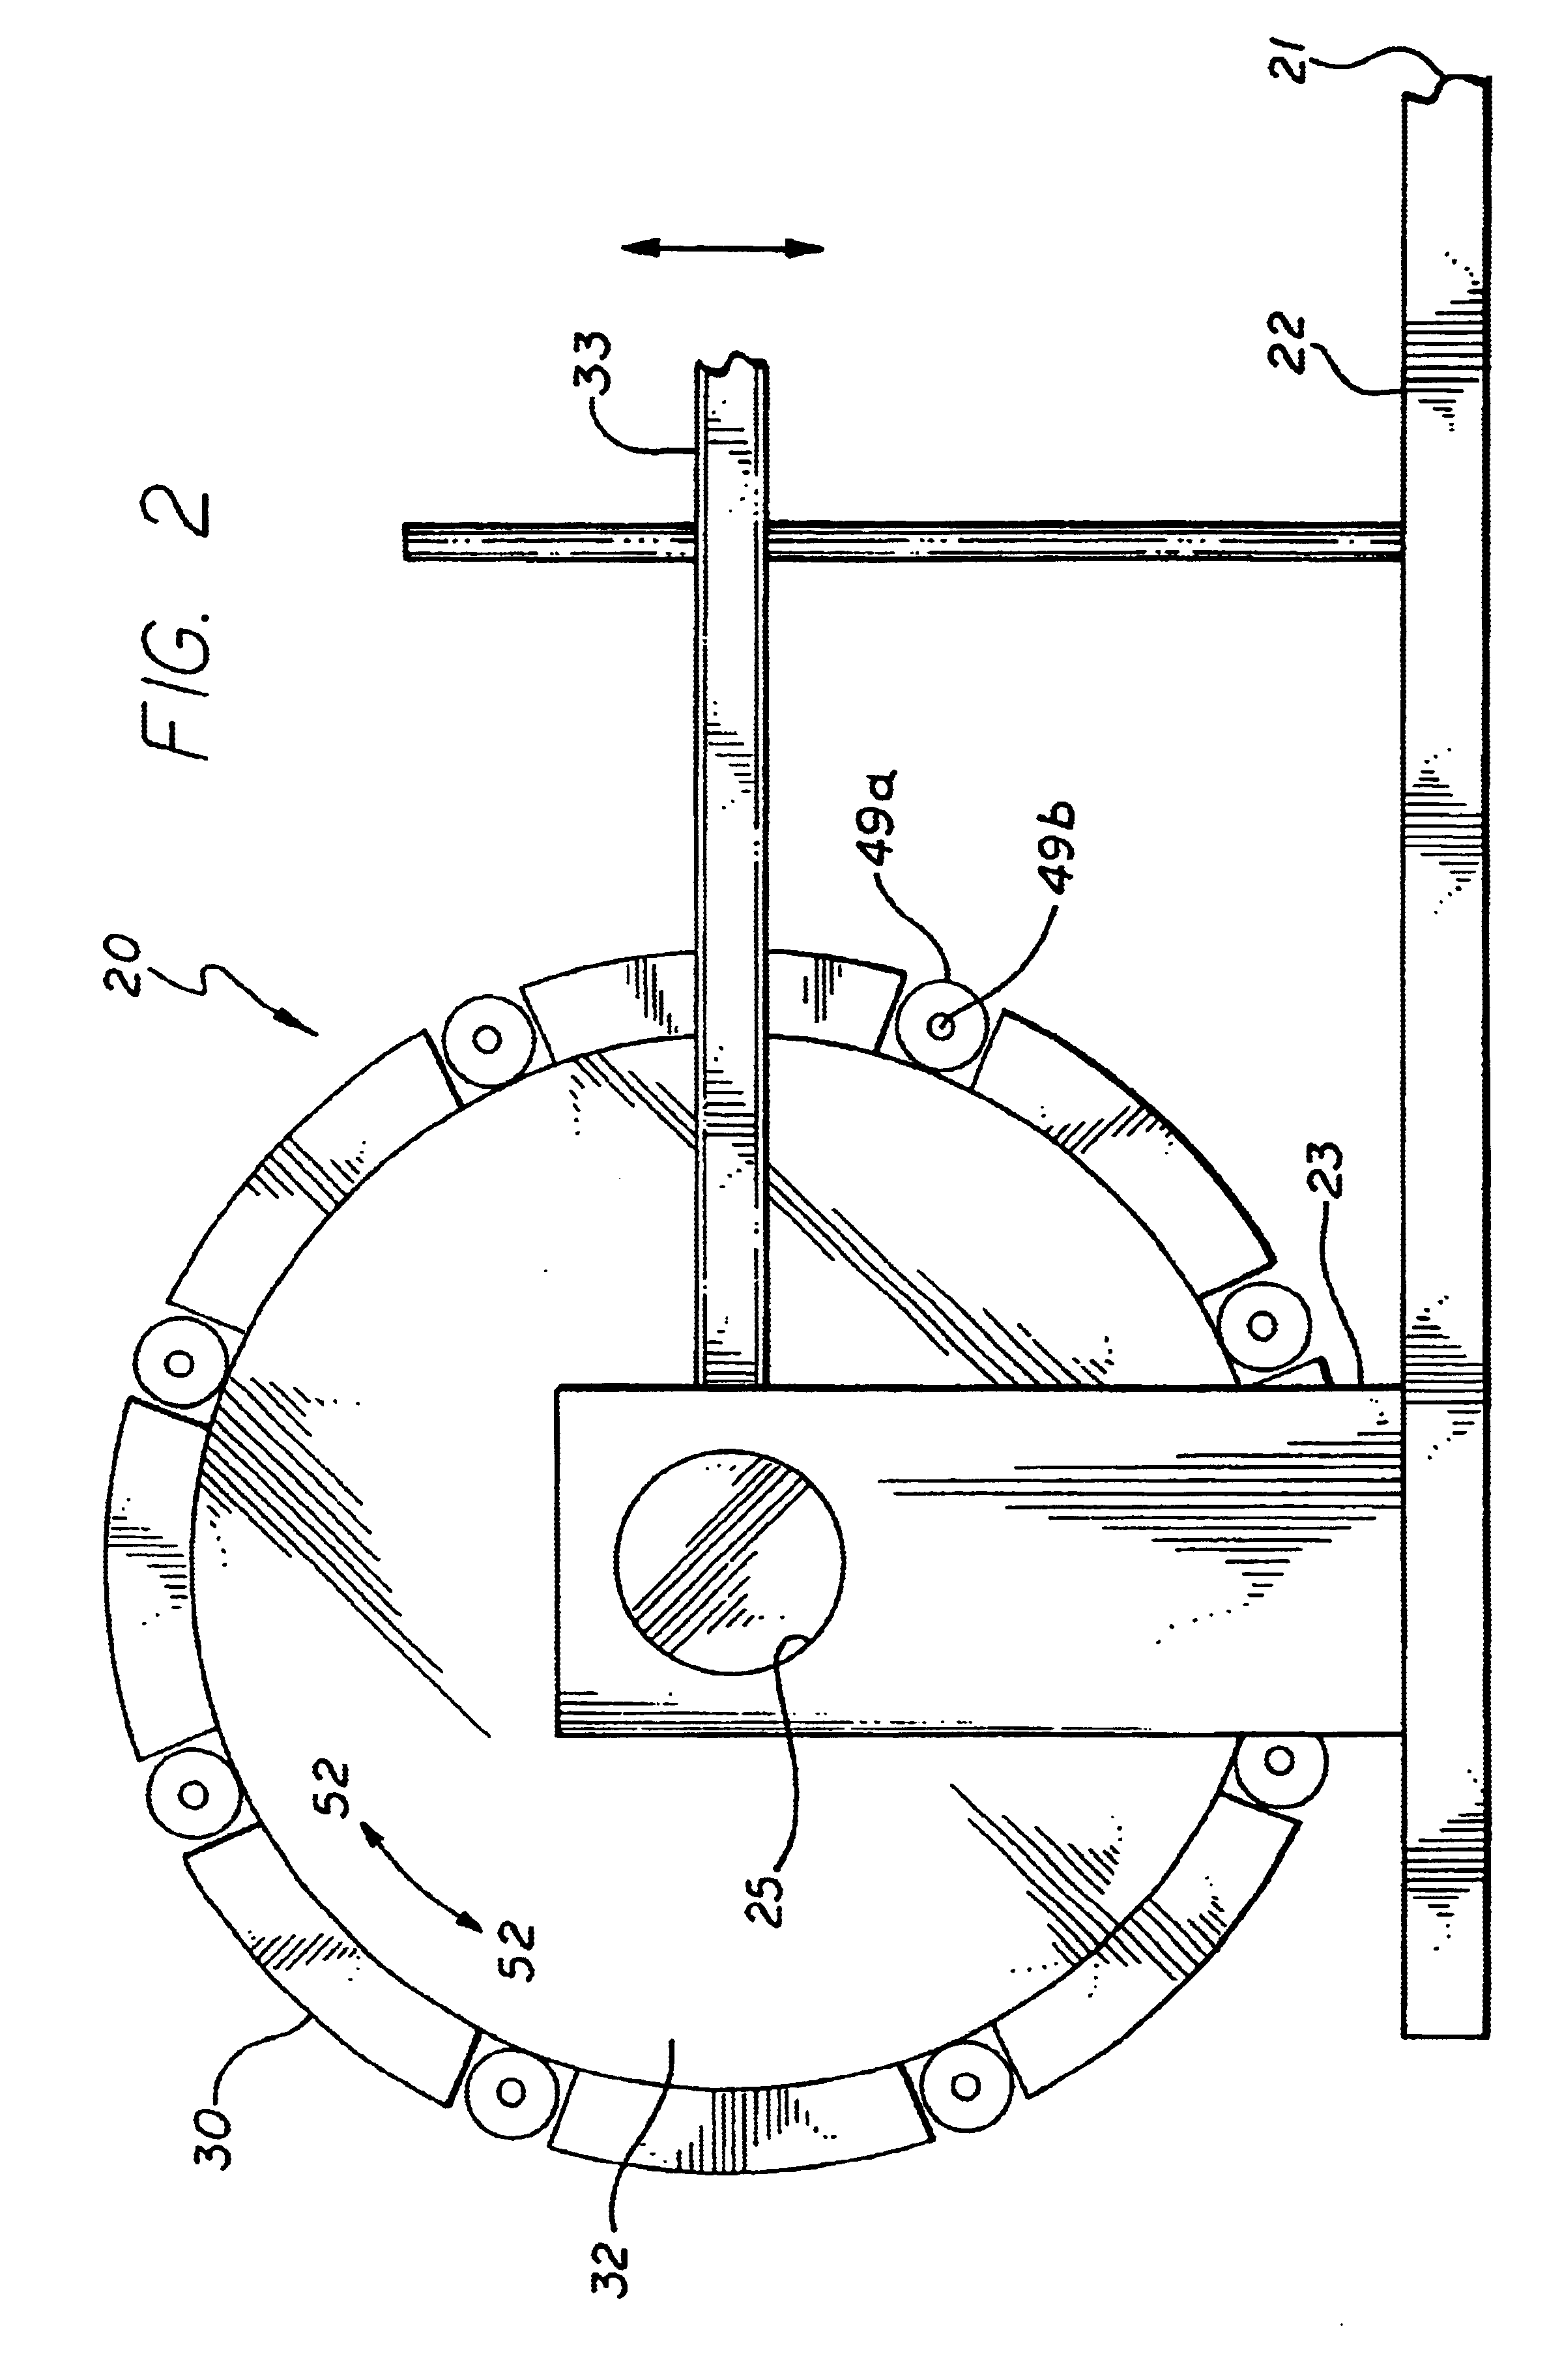 Assembly for crimping an intraluminal device or measuring the radial strength of the intraluminal device and method of use